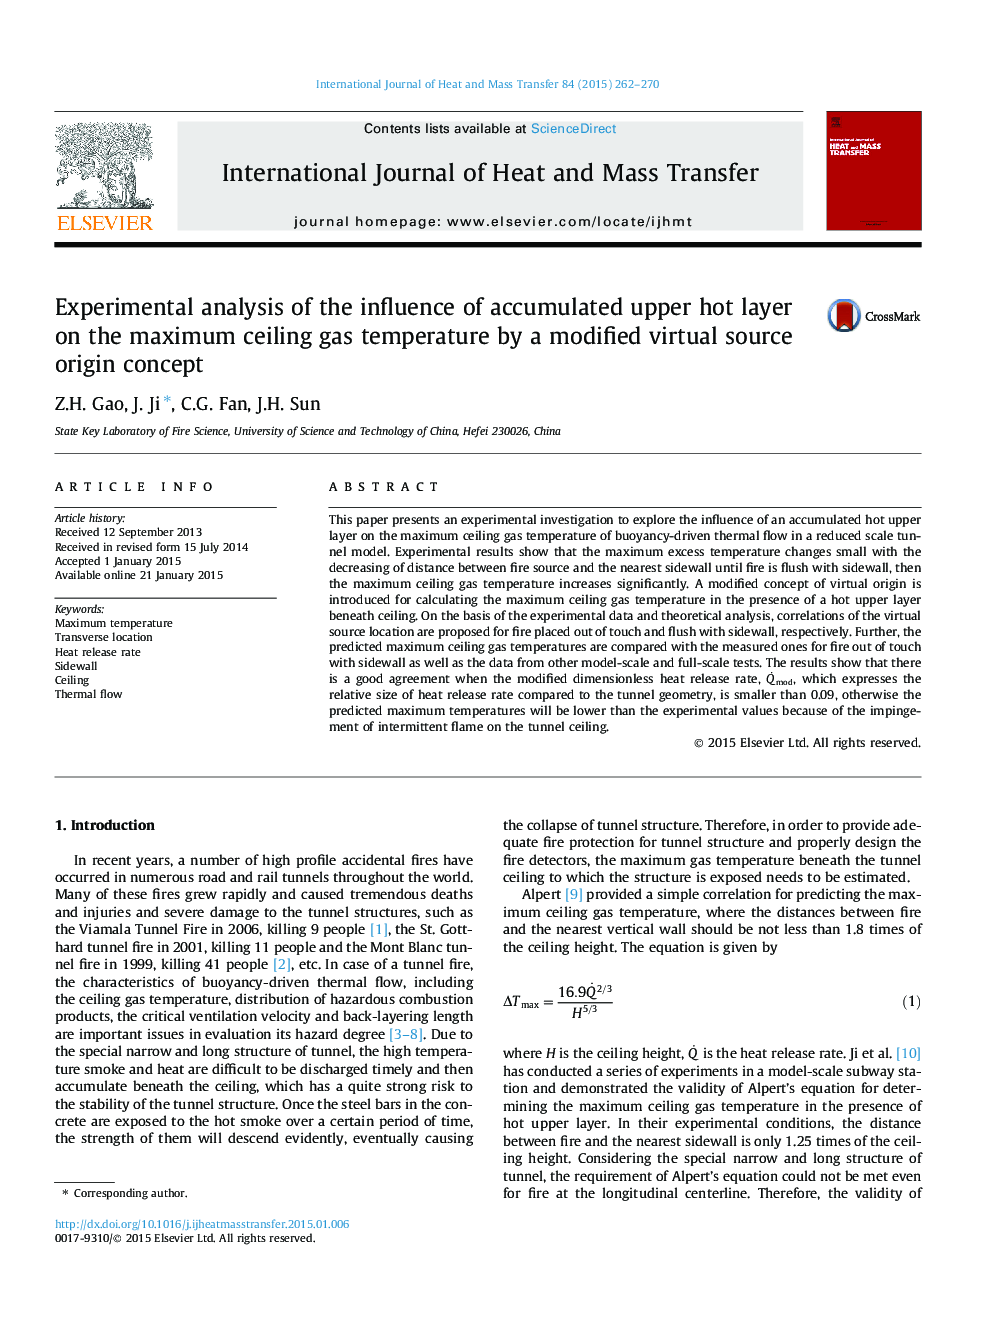 Experimental analysis of the influence of accumulated upper hot layer on the maximum ceiling gas temperature by a modified virtual source origin concept